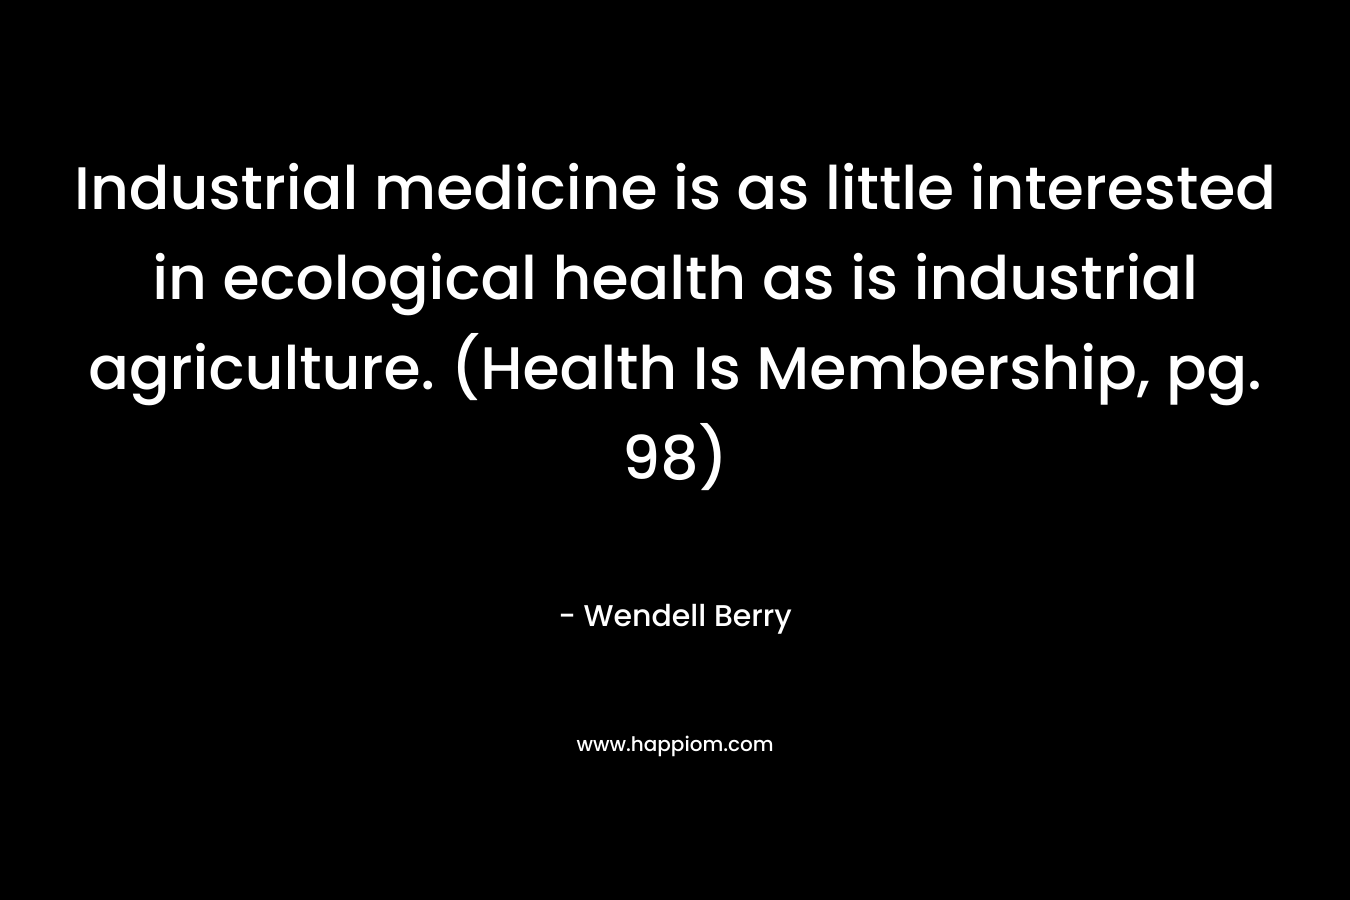 Industrial medicine is as little interested in ecological health as is industrial agriculture. (Health Is Membership, pg. 98)